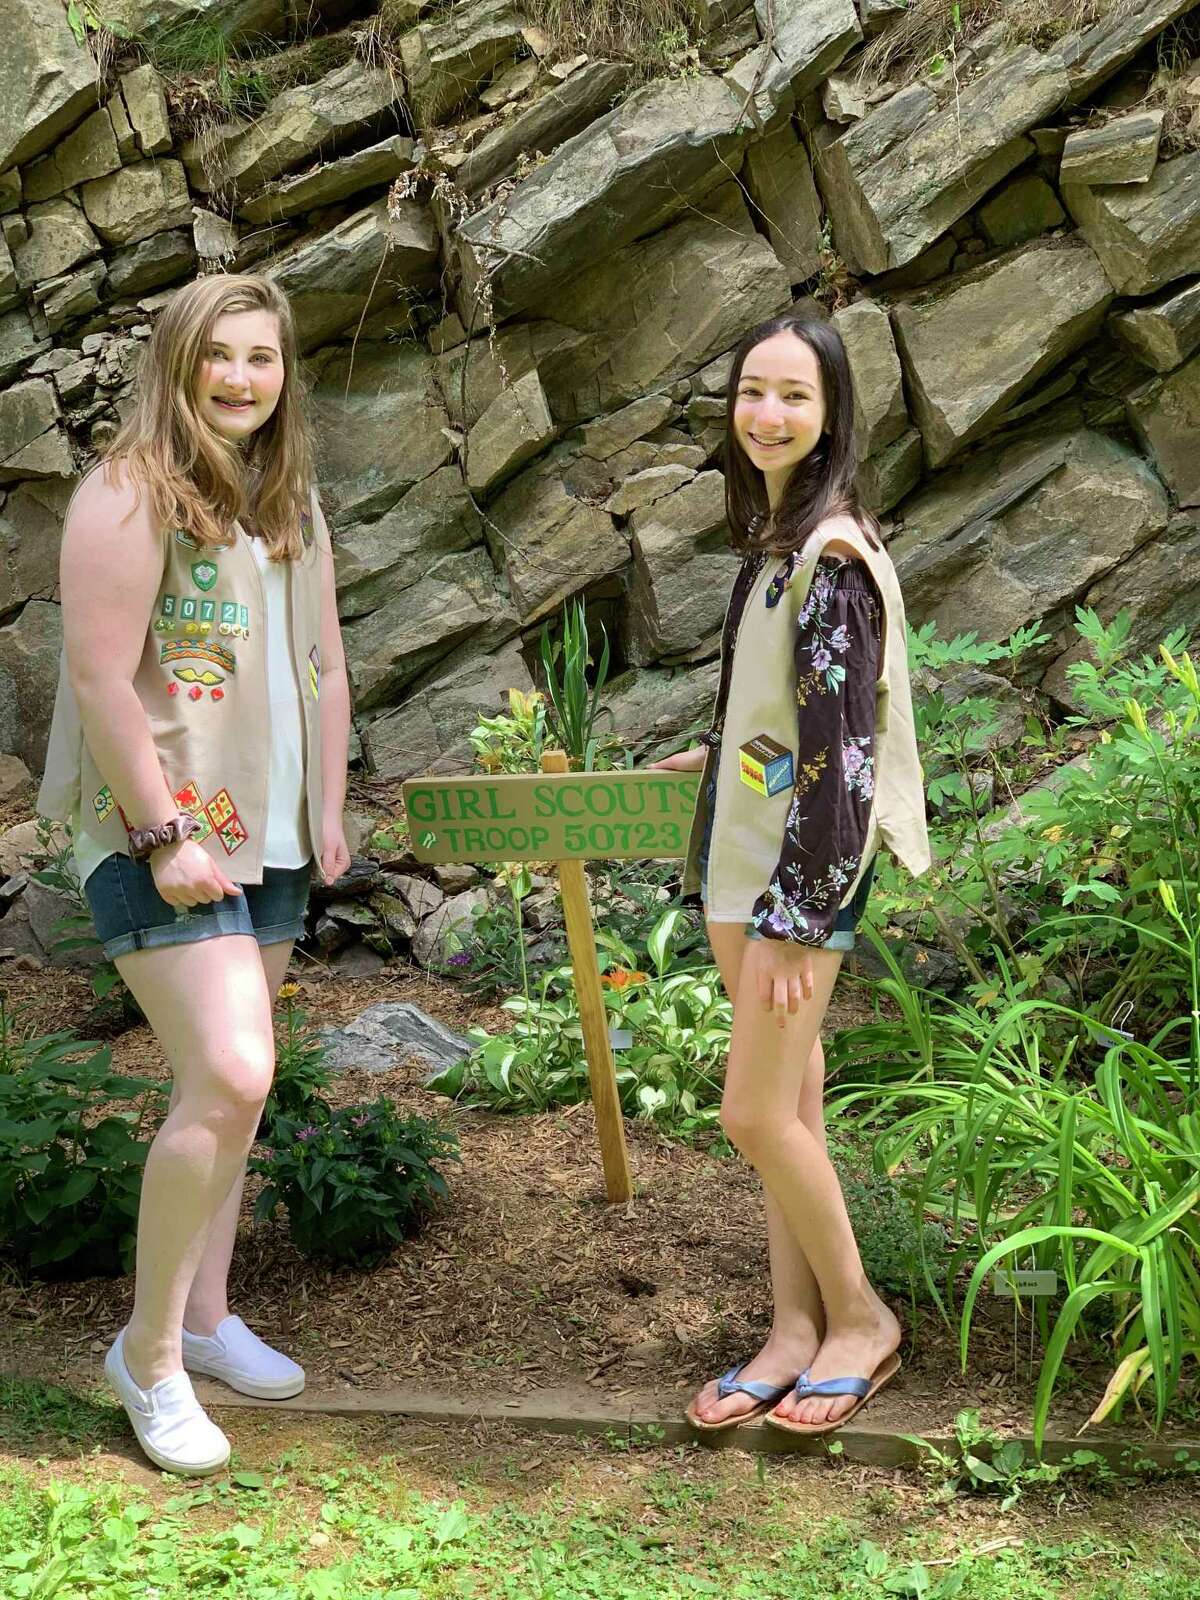 Saint Mary Ridgefield Troop 50723 Girl Scouts Julia Jamba and Isabella Raduazzo stand in front of the pollinator garden they installed at Congregate Housing Prospect Ridge, RHA.